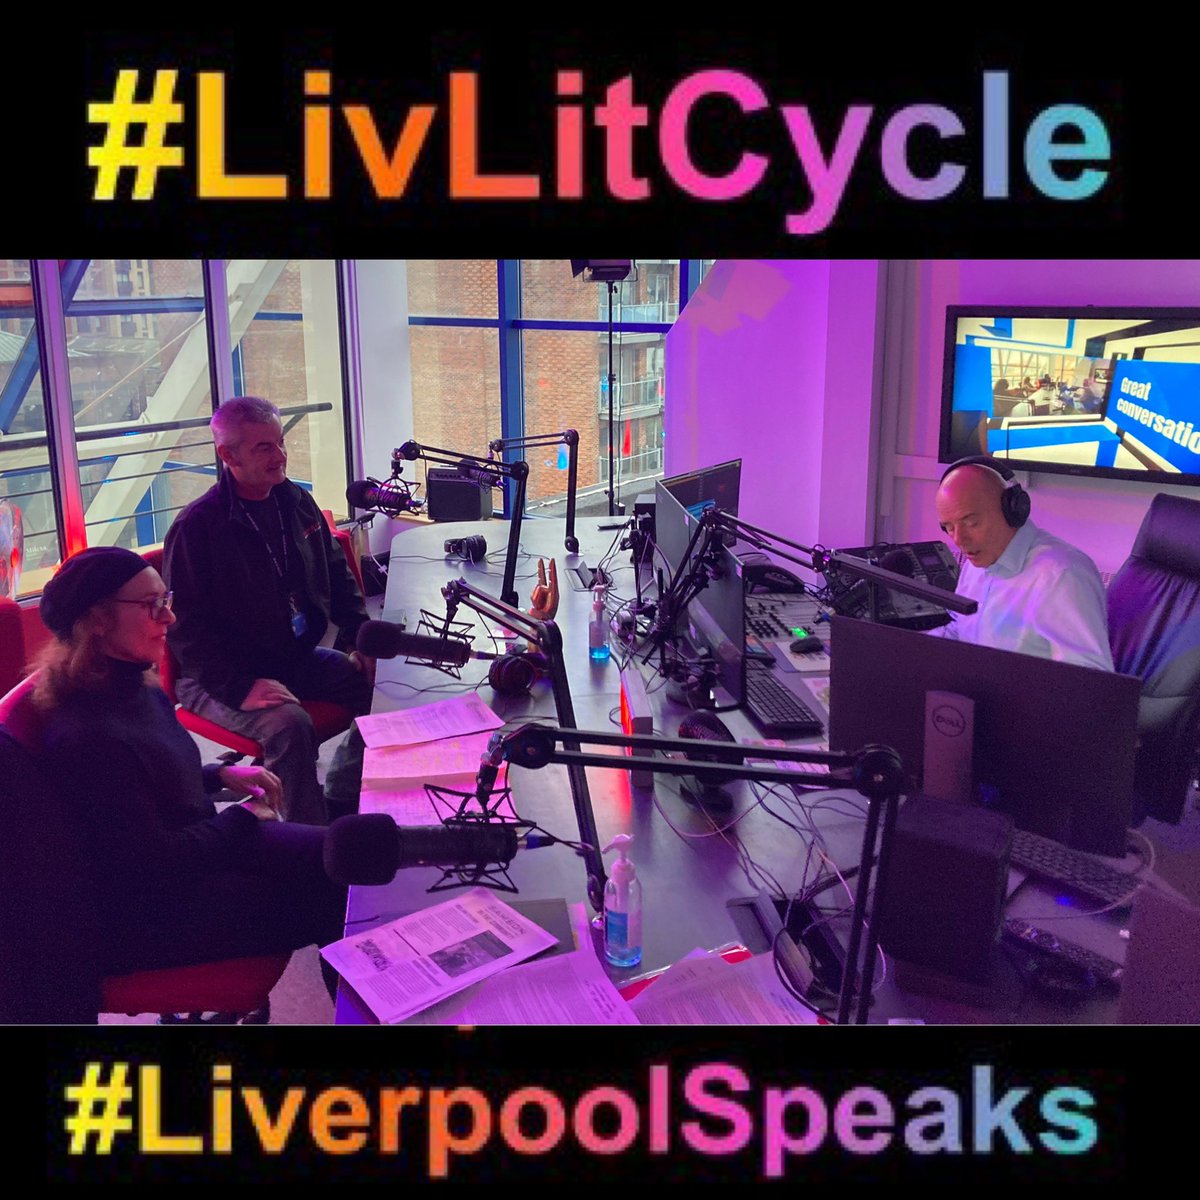 At @liverpoolliveradio today, for #LiverpoolSpeaks with @RoyBasnett , we enjoyed an excellent and informative chat with Zara Richards from Sampson Security, alongside Andie Fessey…